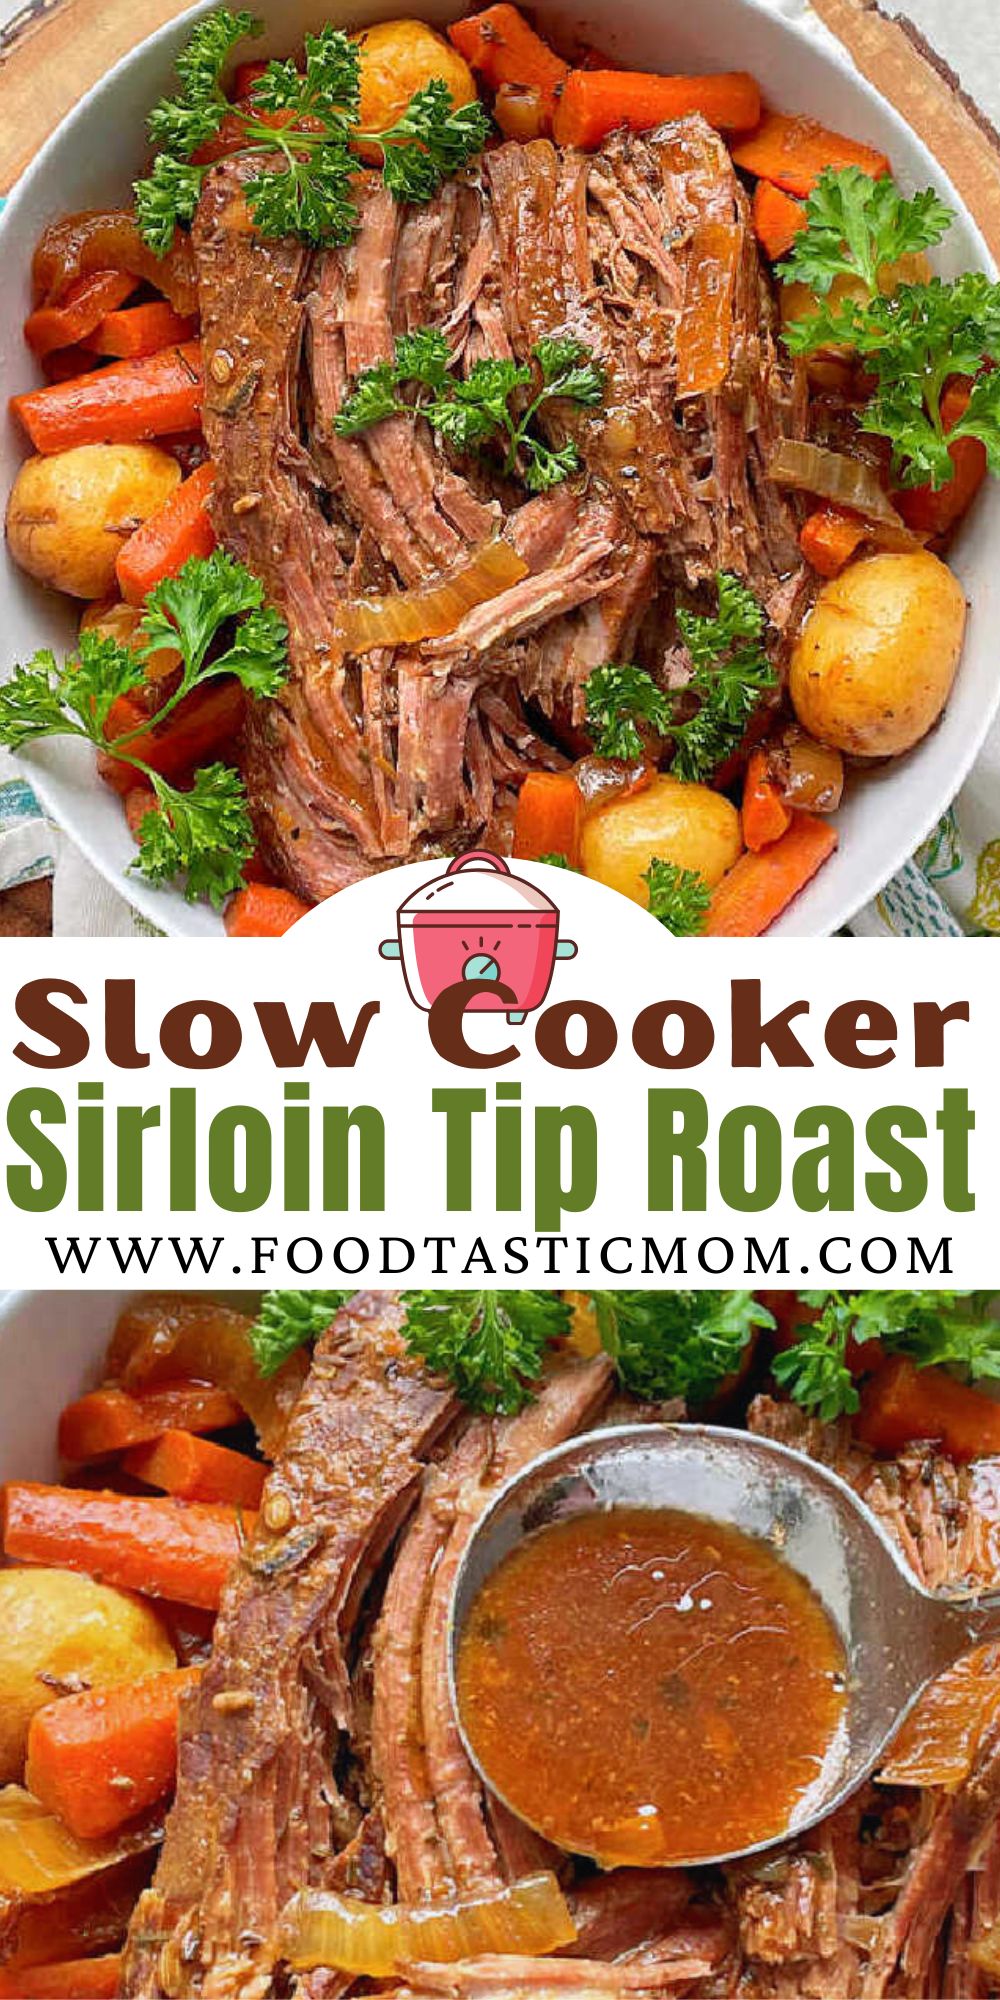 Slow Cooker Sirloin Tip Roast uses simple ingredients like beef stock, apple juice, tomato juice and butter. It's perfect for a special occasion. via @foodtasticmom